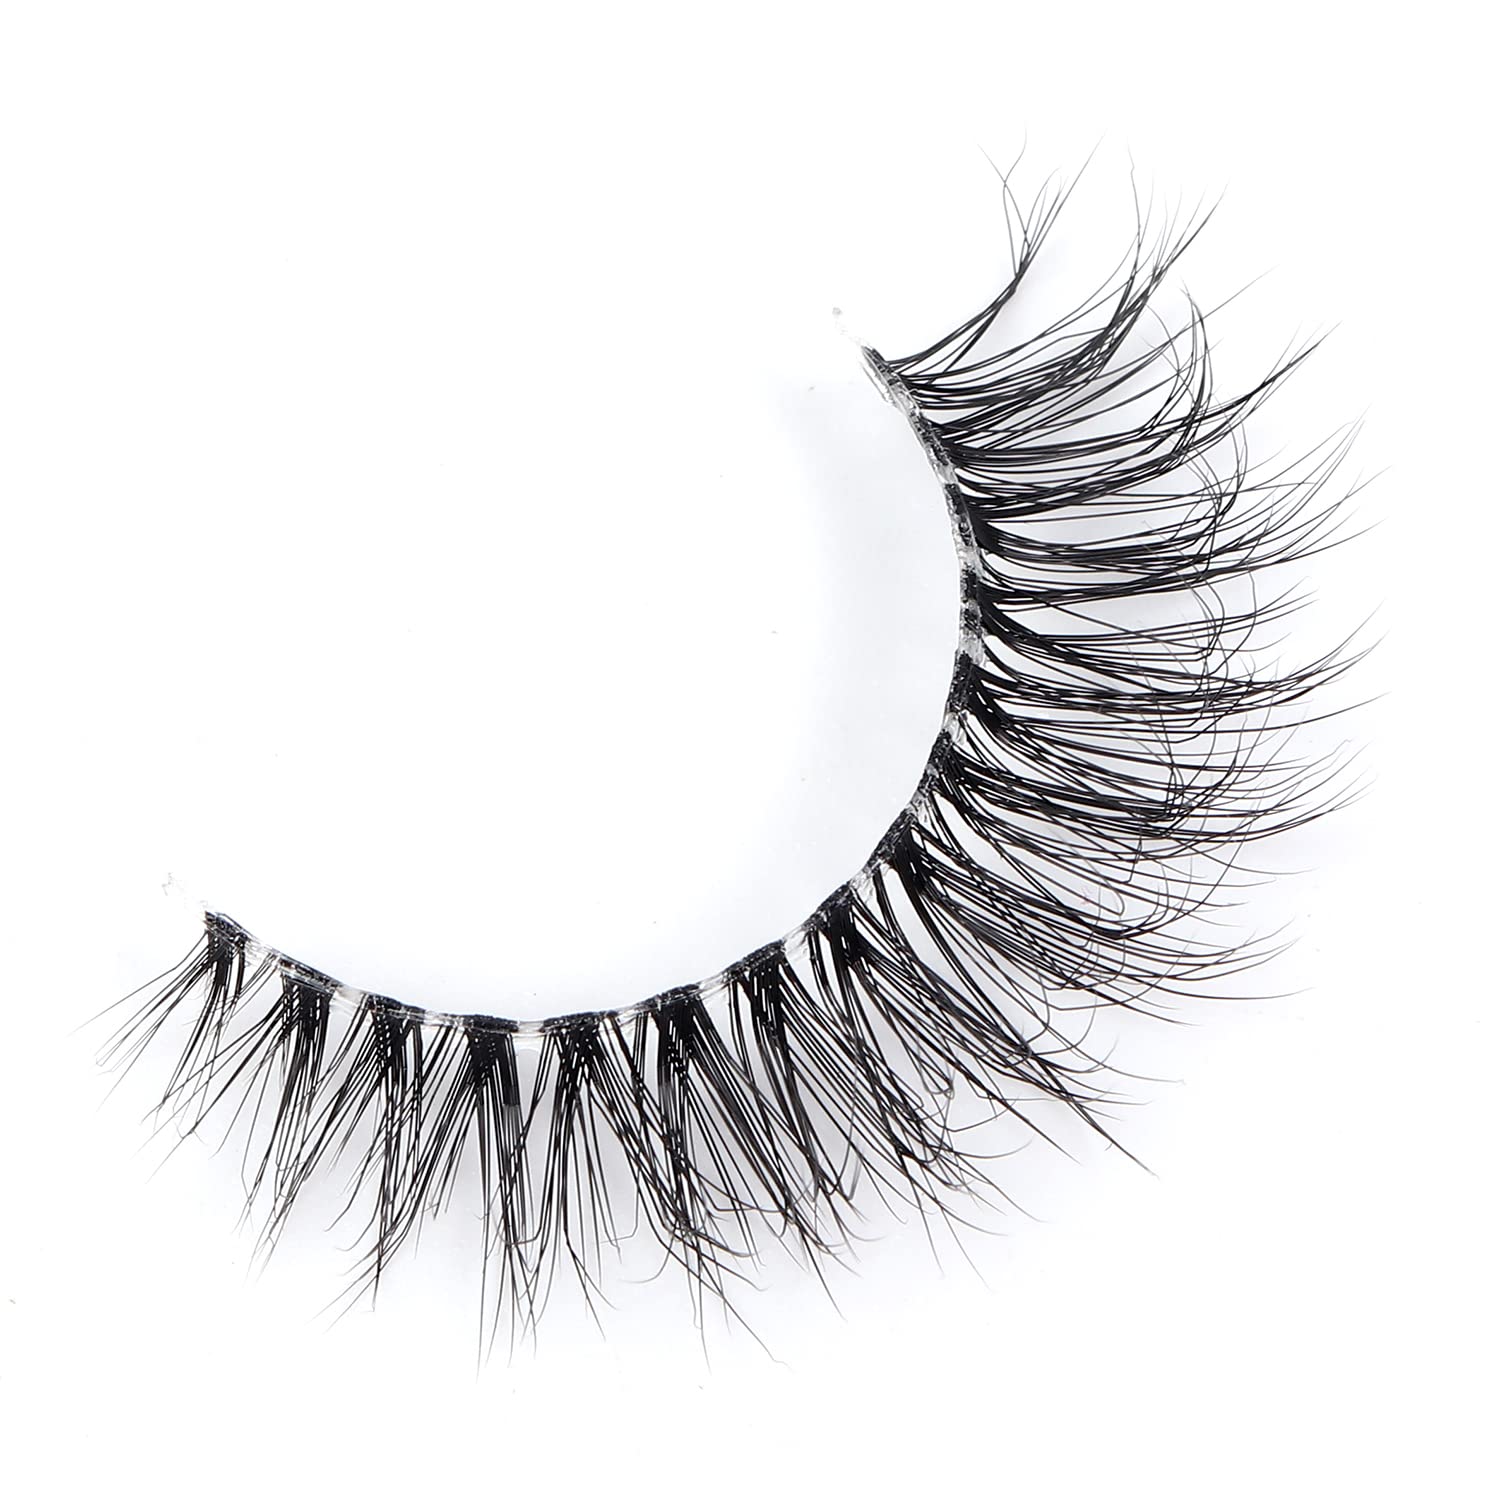 WENEW Cat Eye Lashes Wispy False Eyelashes Natural Look, Fluffy Natural Lashes Clear Band, 3D Faux Mink Lashes (C1, 7 Pairs)